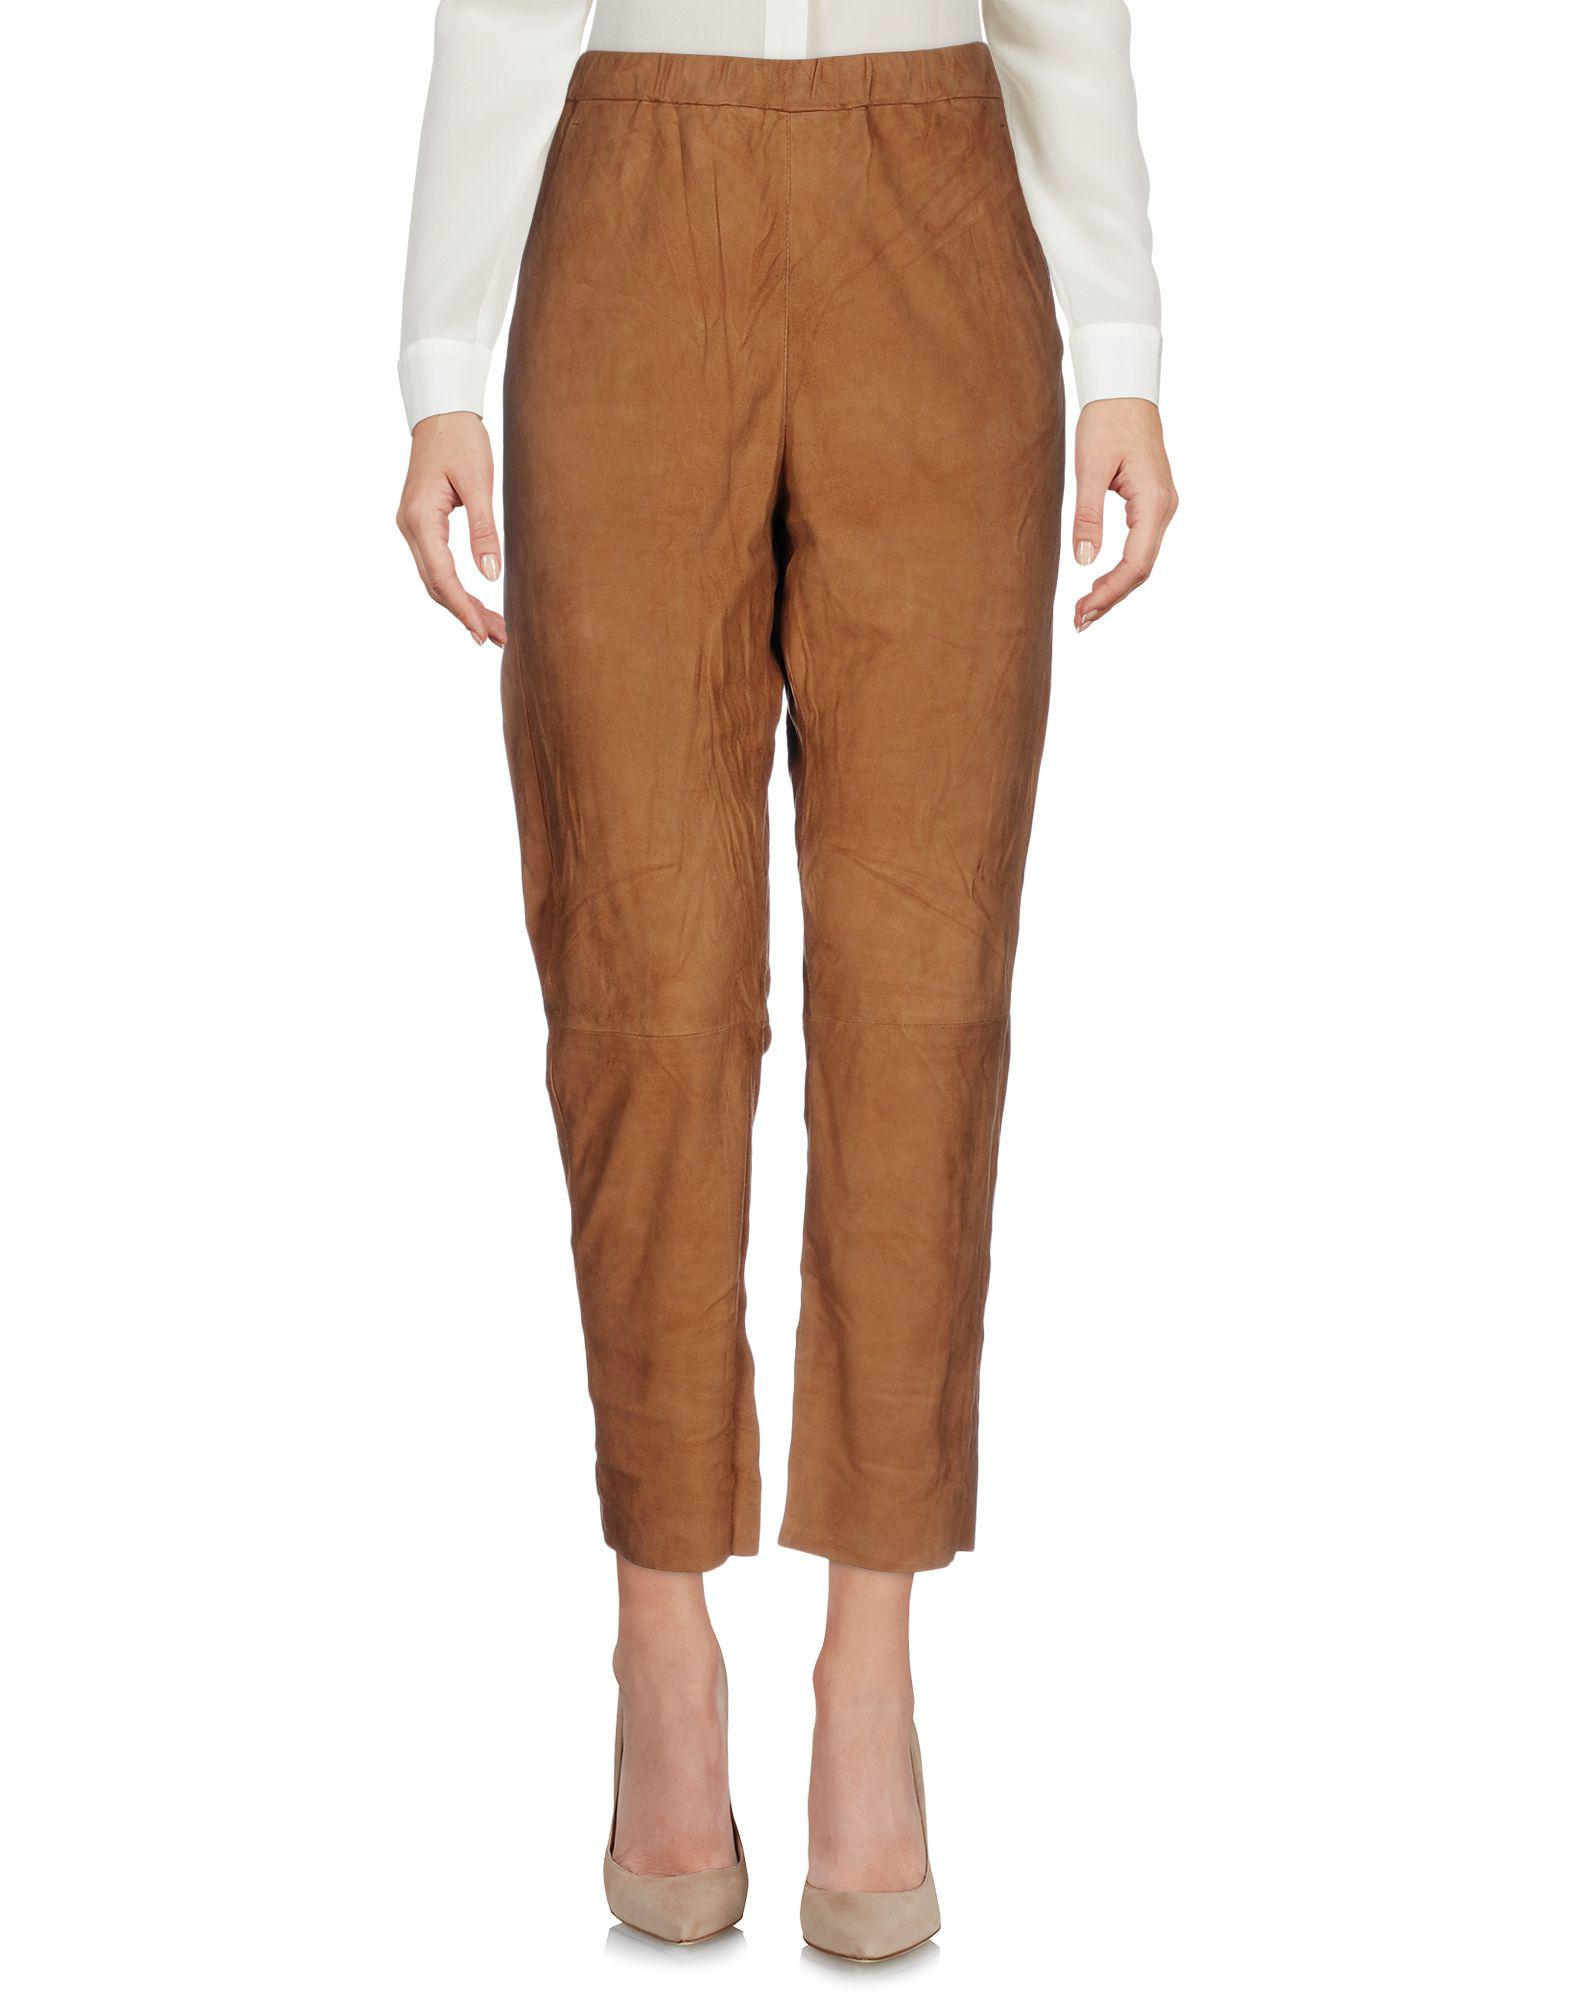 DROMe Leather Casual Pants in Camel (Brown) - Lyst